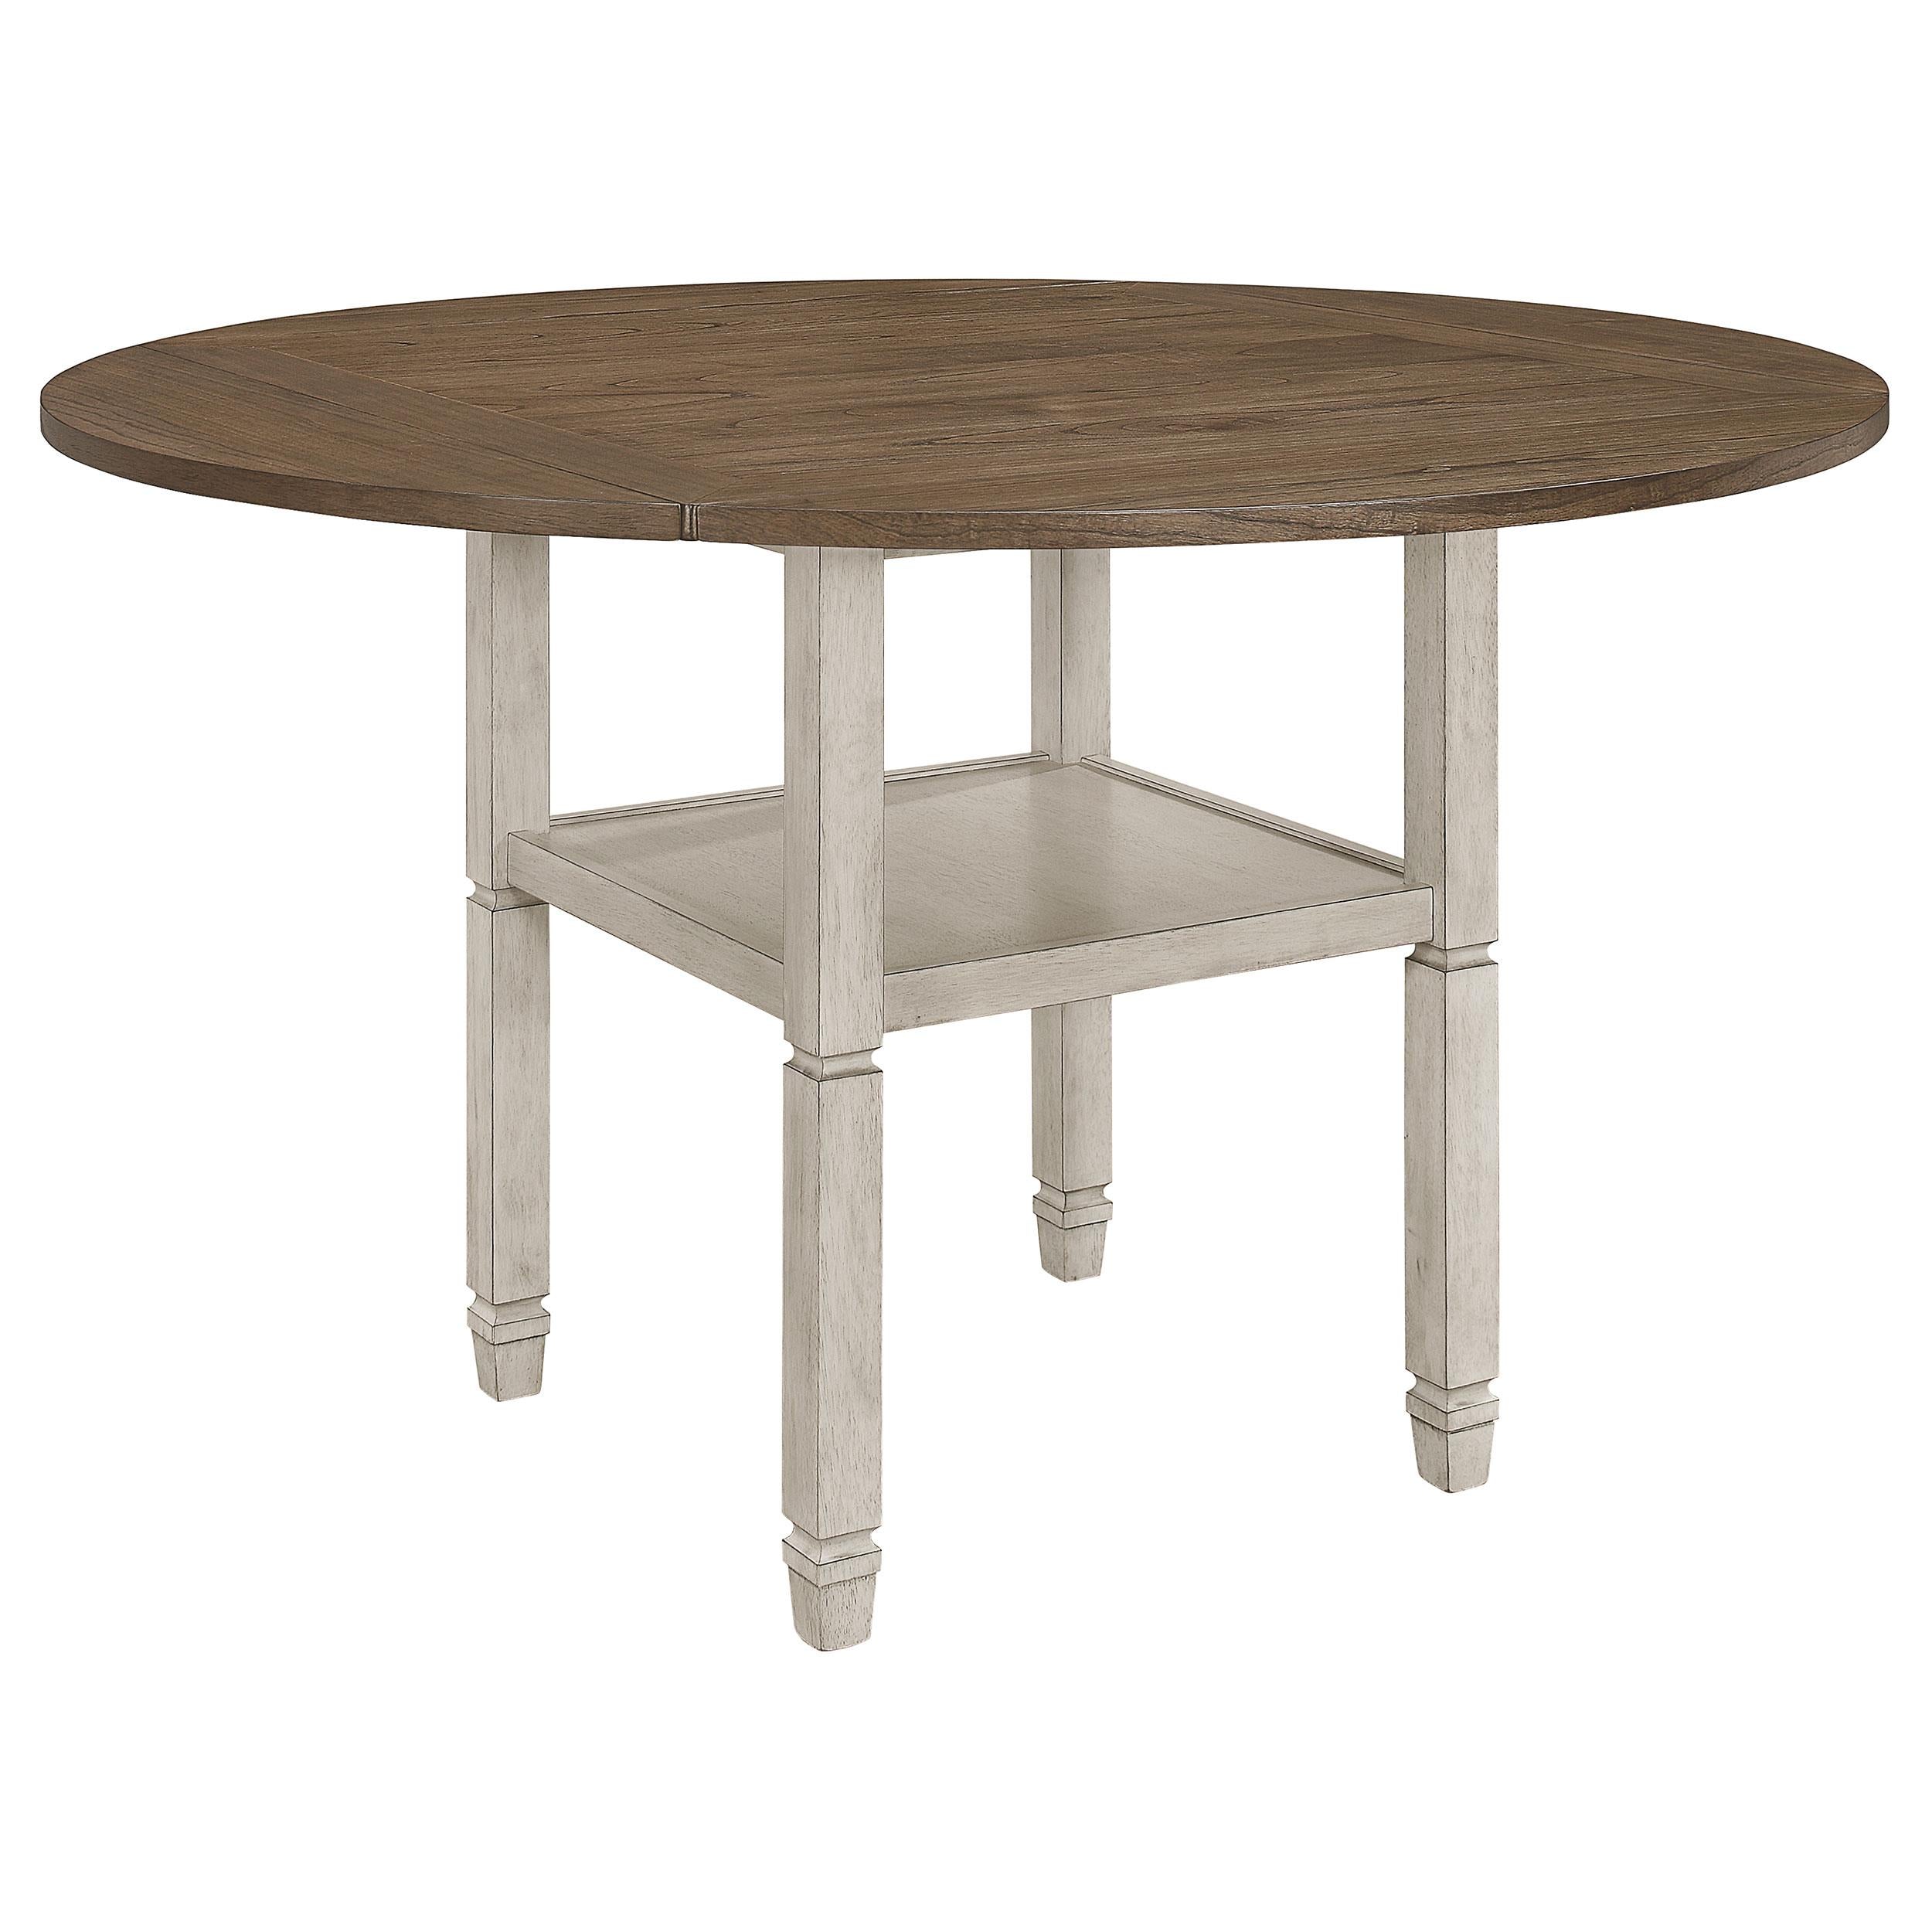 Sarasota Counter Height Table with Shelf Storage Nutmeg and Rustic Cream image